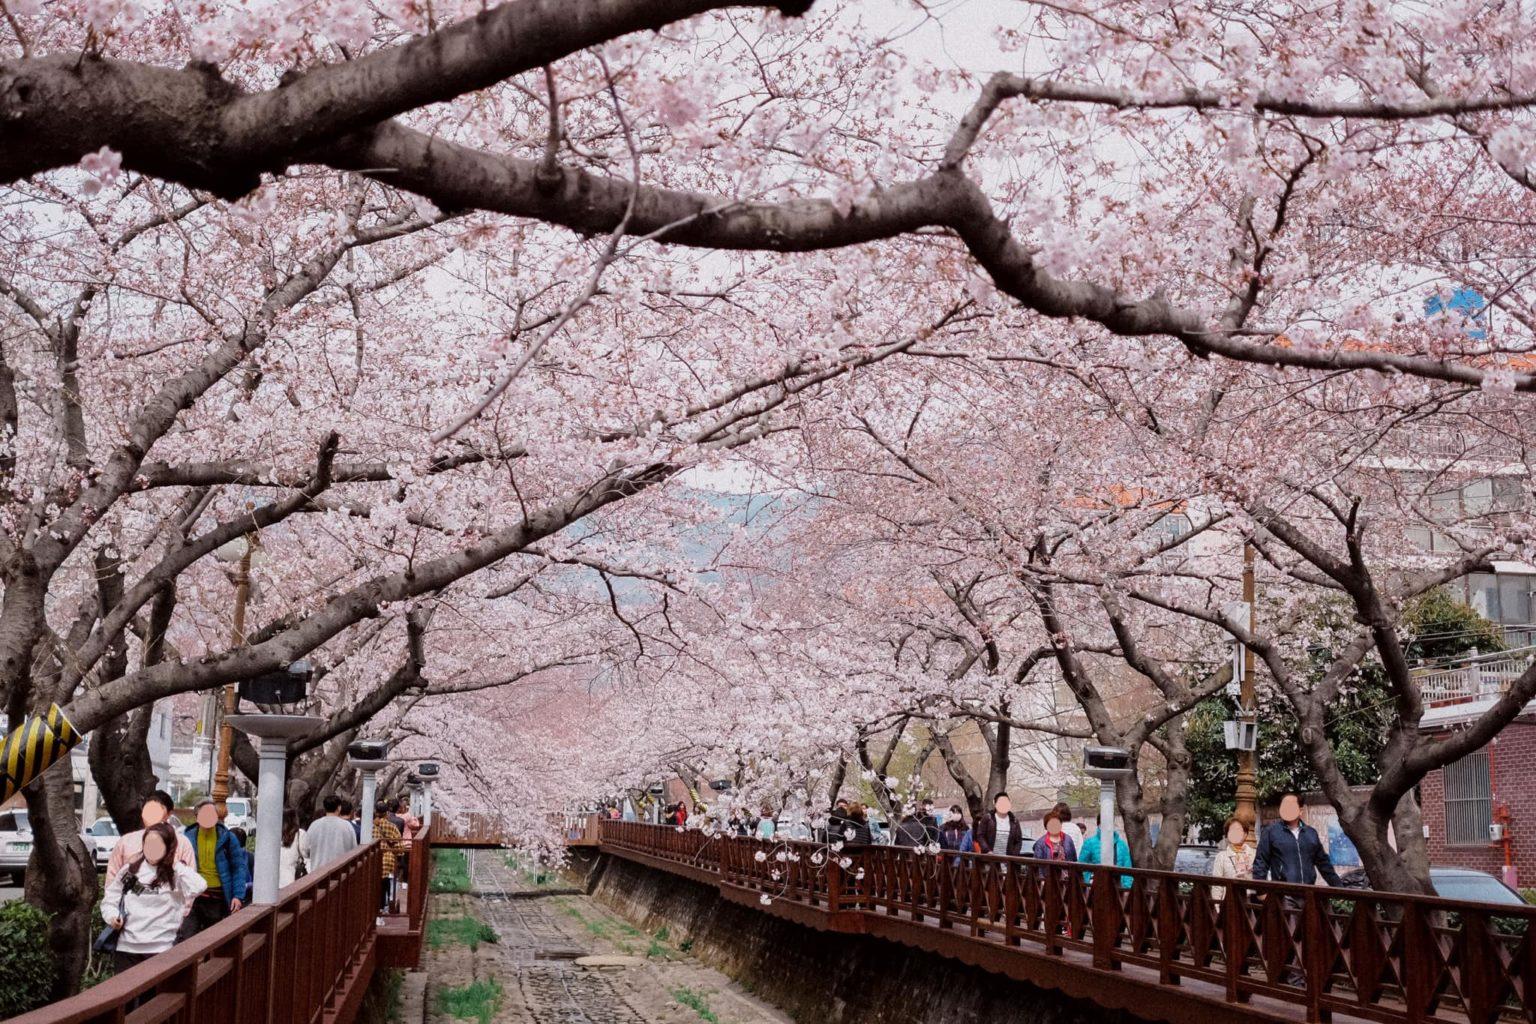 Where to Go for The Most Beautiful Cherry Blossoms in South Korea?